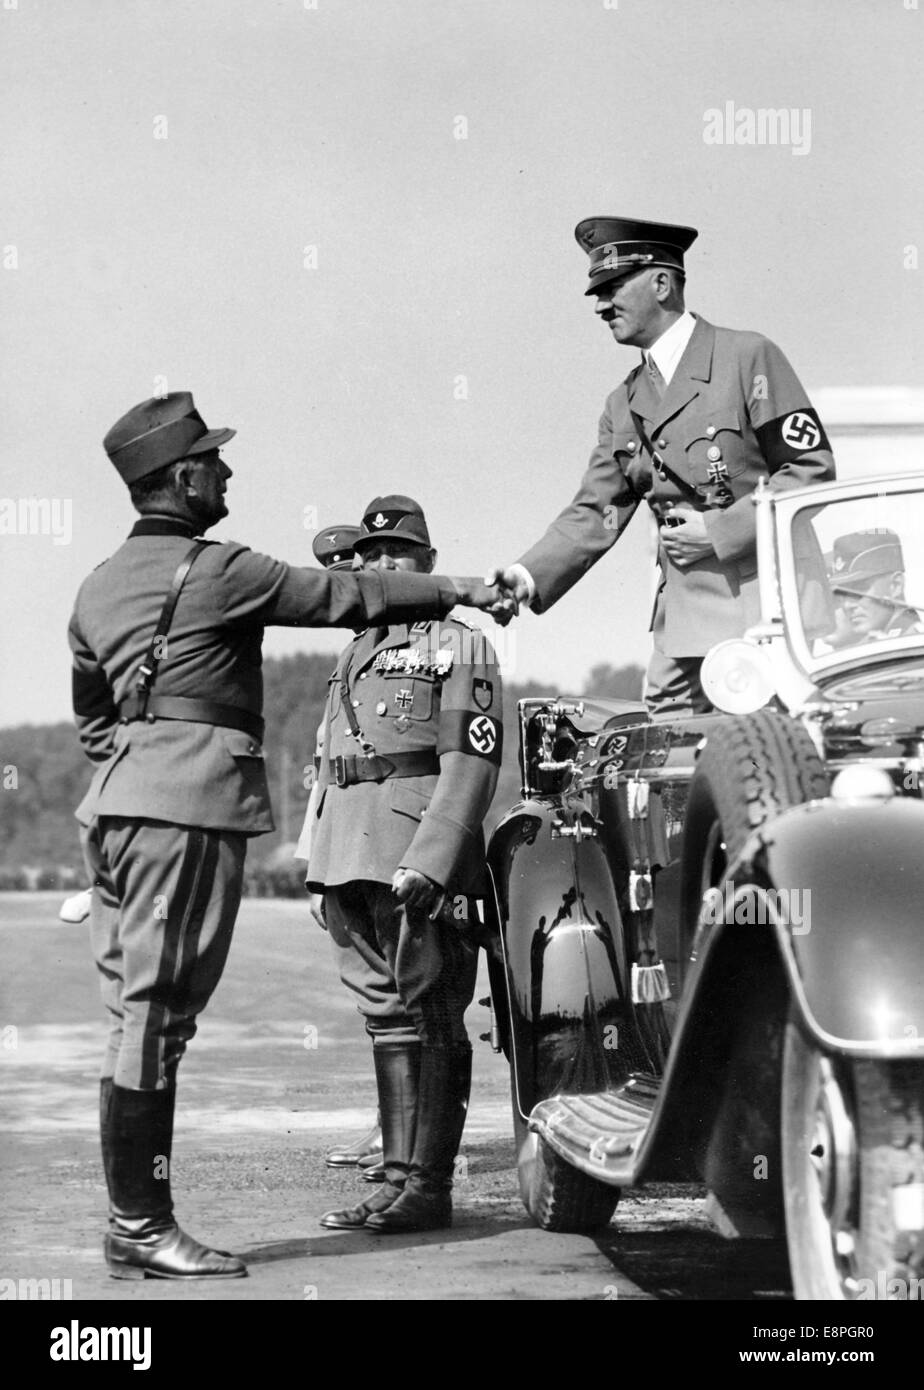 Nuremberg Rally 1937 in Nuremberg, Germany - Adolf Hitler shakes hands with a leader of the Reich Labour Service (RAD) during the grand march-past of the RAD at the Nazi party rally grounds. (Flaws in quality due to the historic picture copy) Fotoarchiv für Zeitgeschichtee - NO WIRE SERVICE - Stock Photo